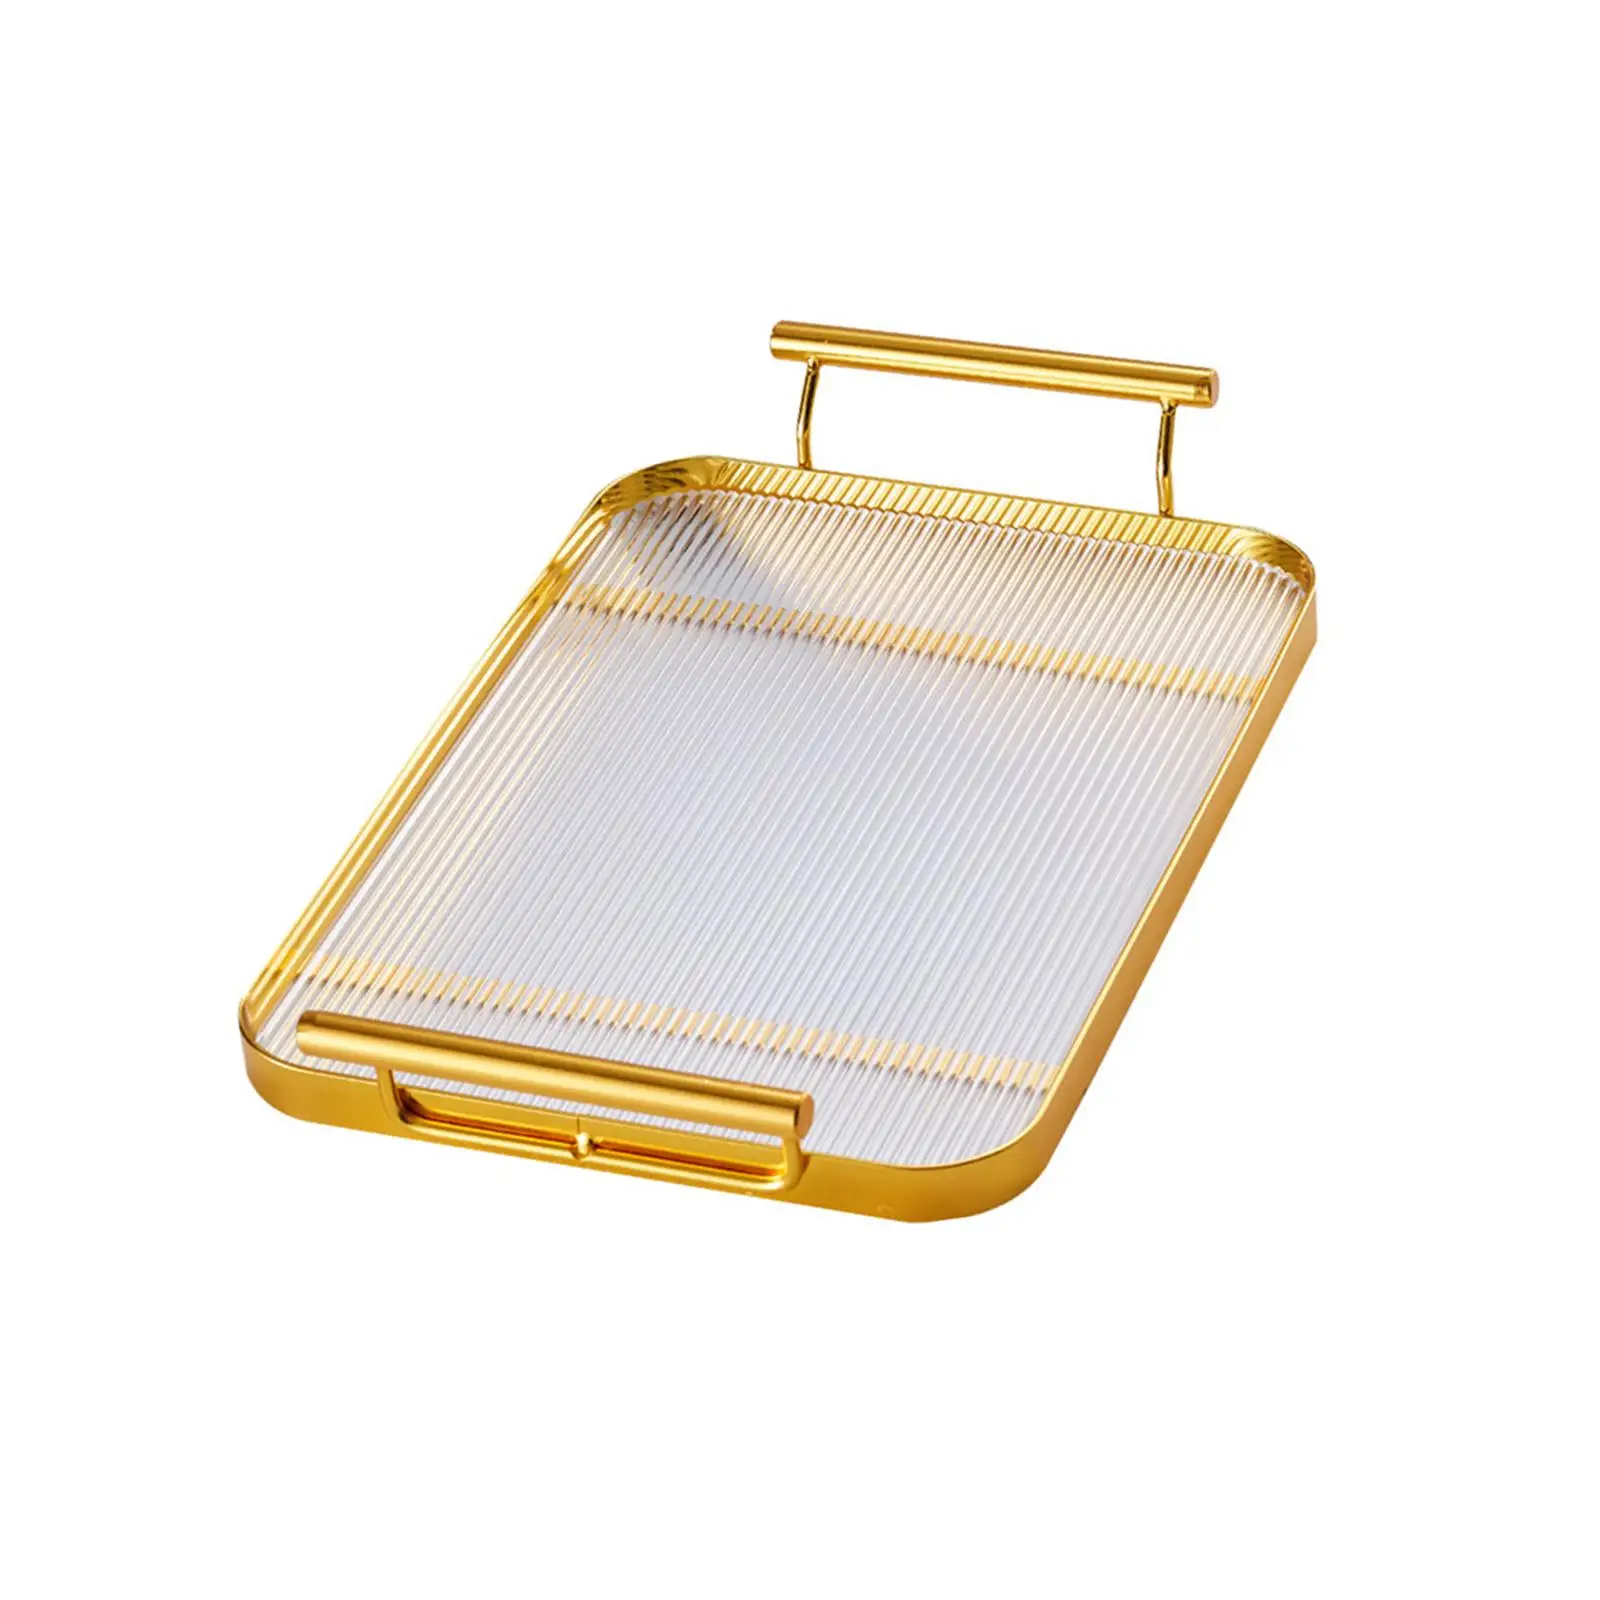 Serving Tray with Handle Appetizer Display Keys Drinks coffee servings Tray for Countertop Bedside Table Kitchen Cabinet Bedroom